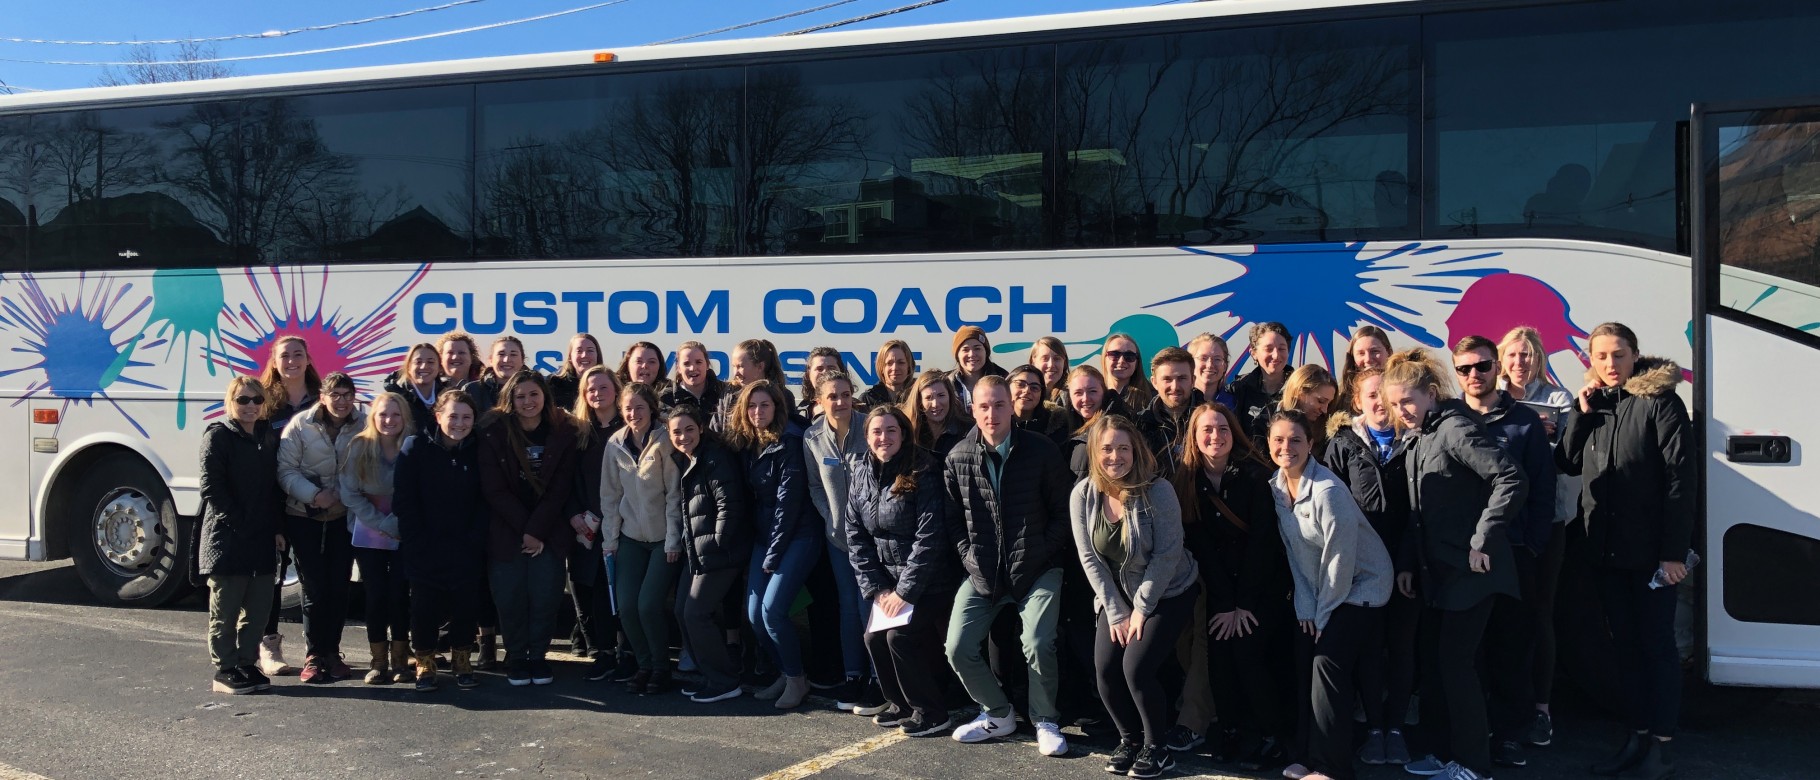 Fifty M.O.S.T. students recently explored the Koomar Center in Newton, Massachusetts during a field trip